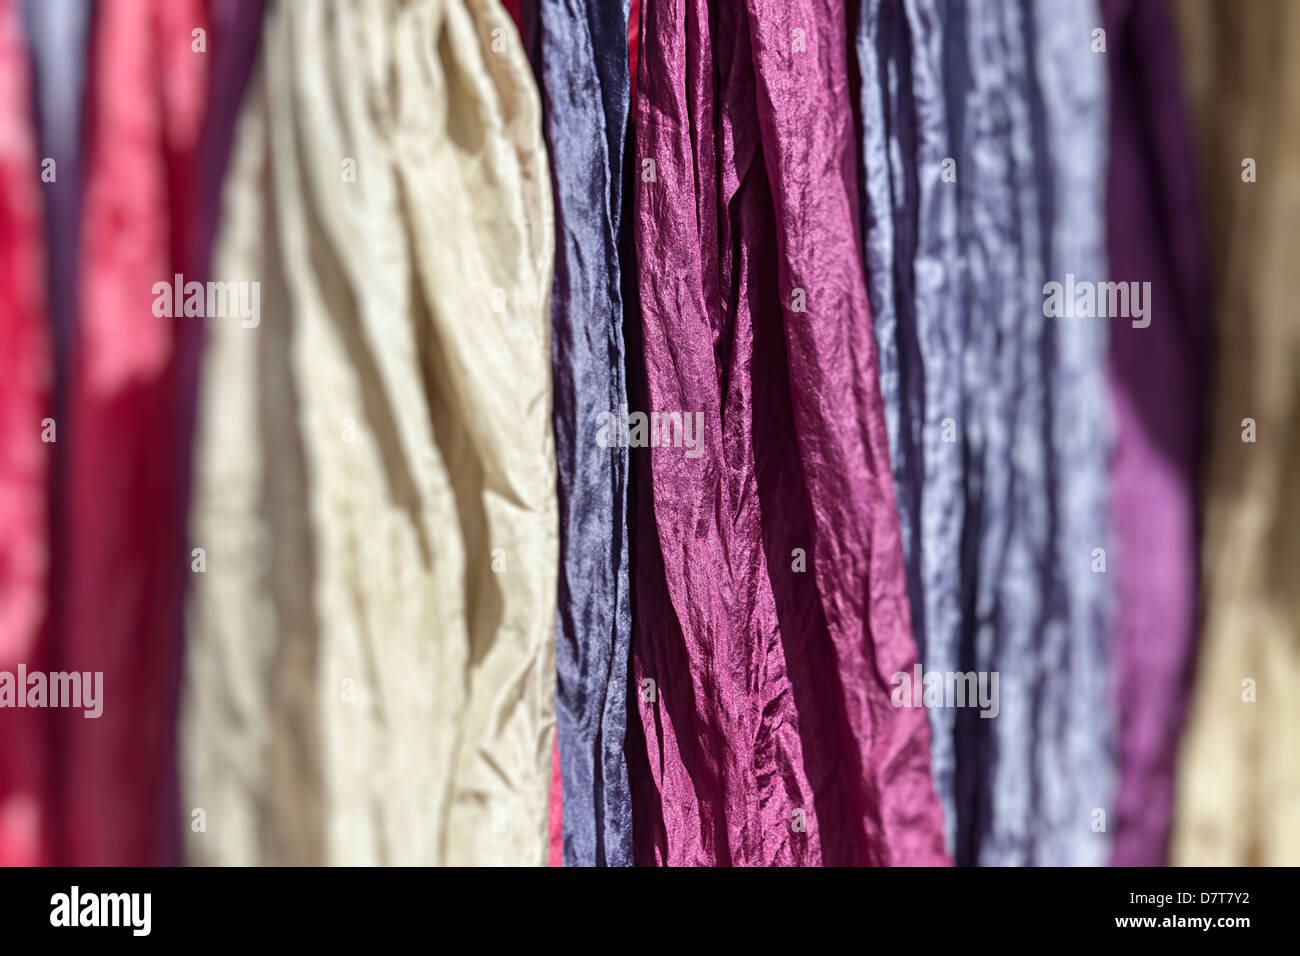 Silk scarves dyed using cochineal, Teguise market, Lanzarote, Canary Islands, Spain Stock Photo